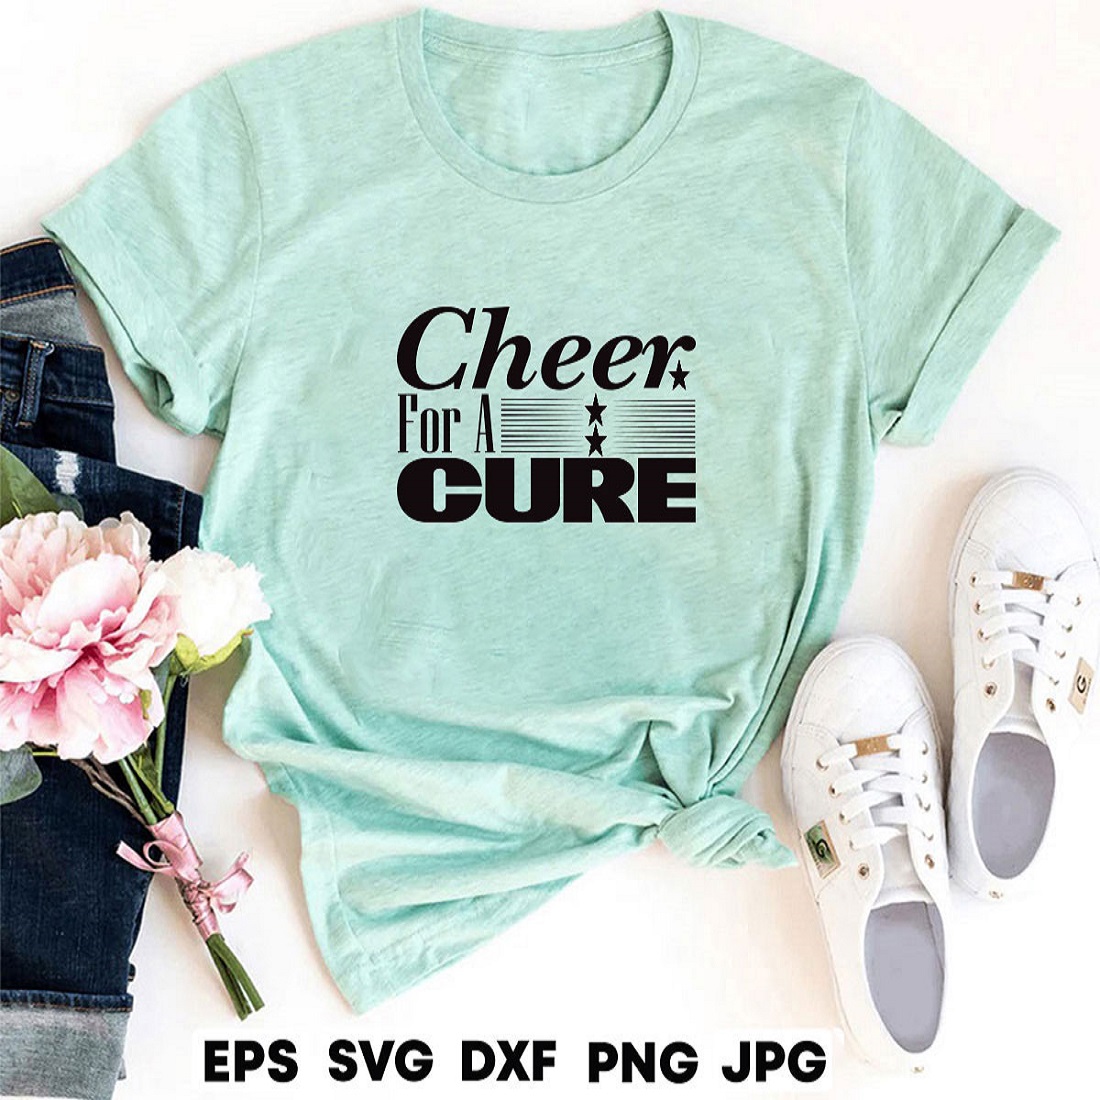 cheer for a cure jj 383